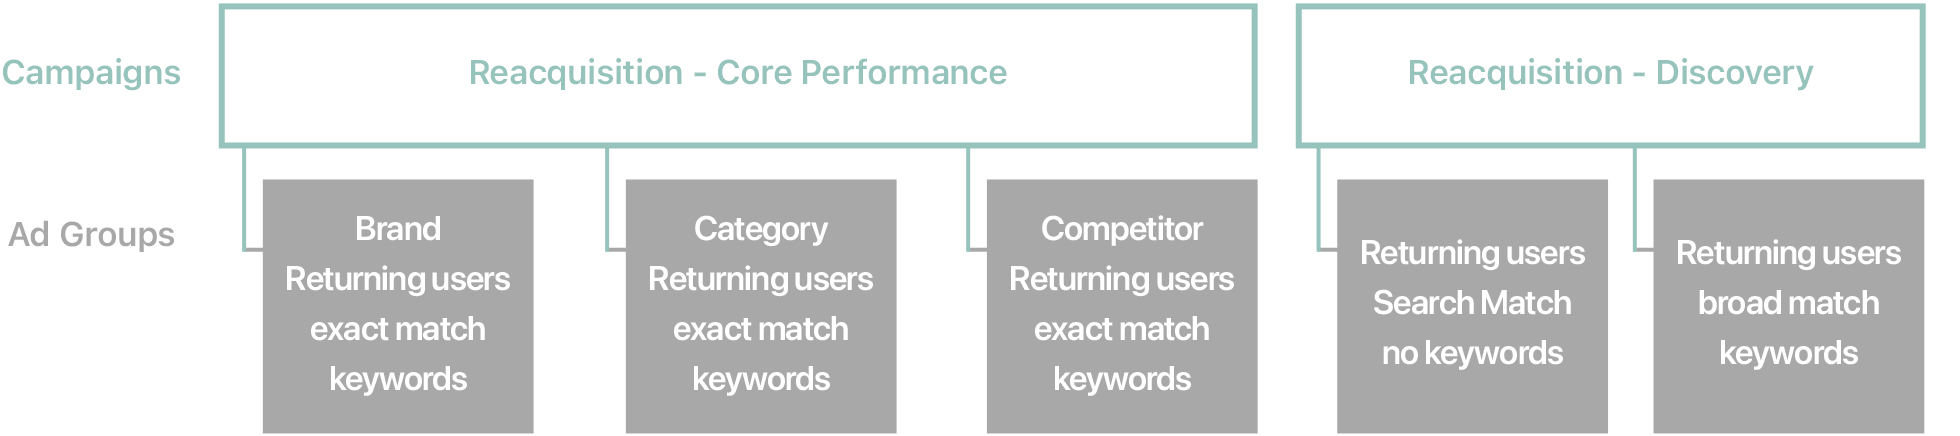 A diagram showing how to set reacquisition campaigns with associated ad groups. One campaign is named Reacquisition - Core Performance. It has three ad groups. One is set to reach returning users and contains exact match brand keywords. Another is set to returning users and contains exact match category keywords. Another is set to returning users and contains  exact match competitor keywords. The second campaign is named Reacquisition - Discovery. It has two ad groups. One is set to reach returning users, with Search Match on, and no keywords. The other is set to returning users with broad match keywords only. 